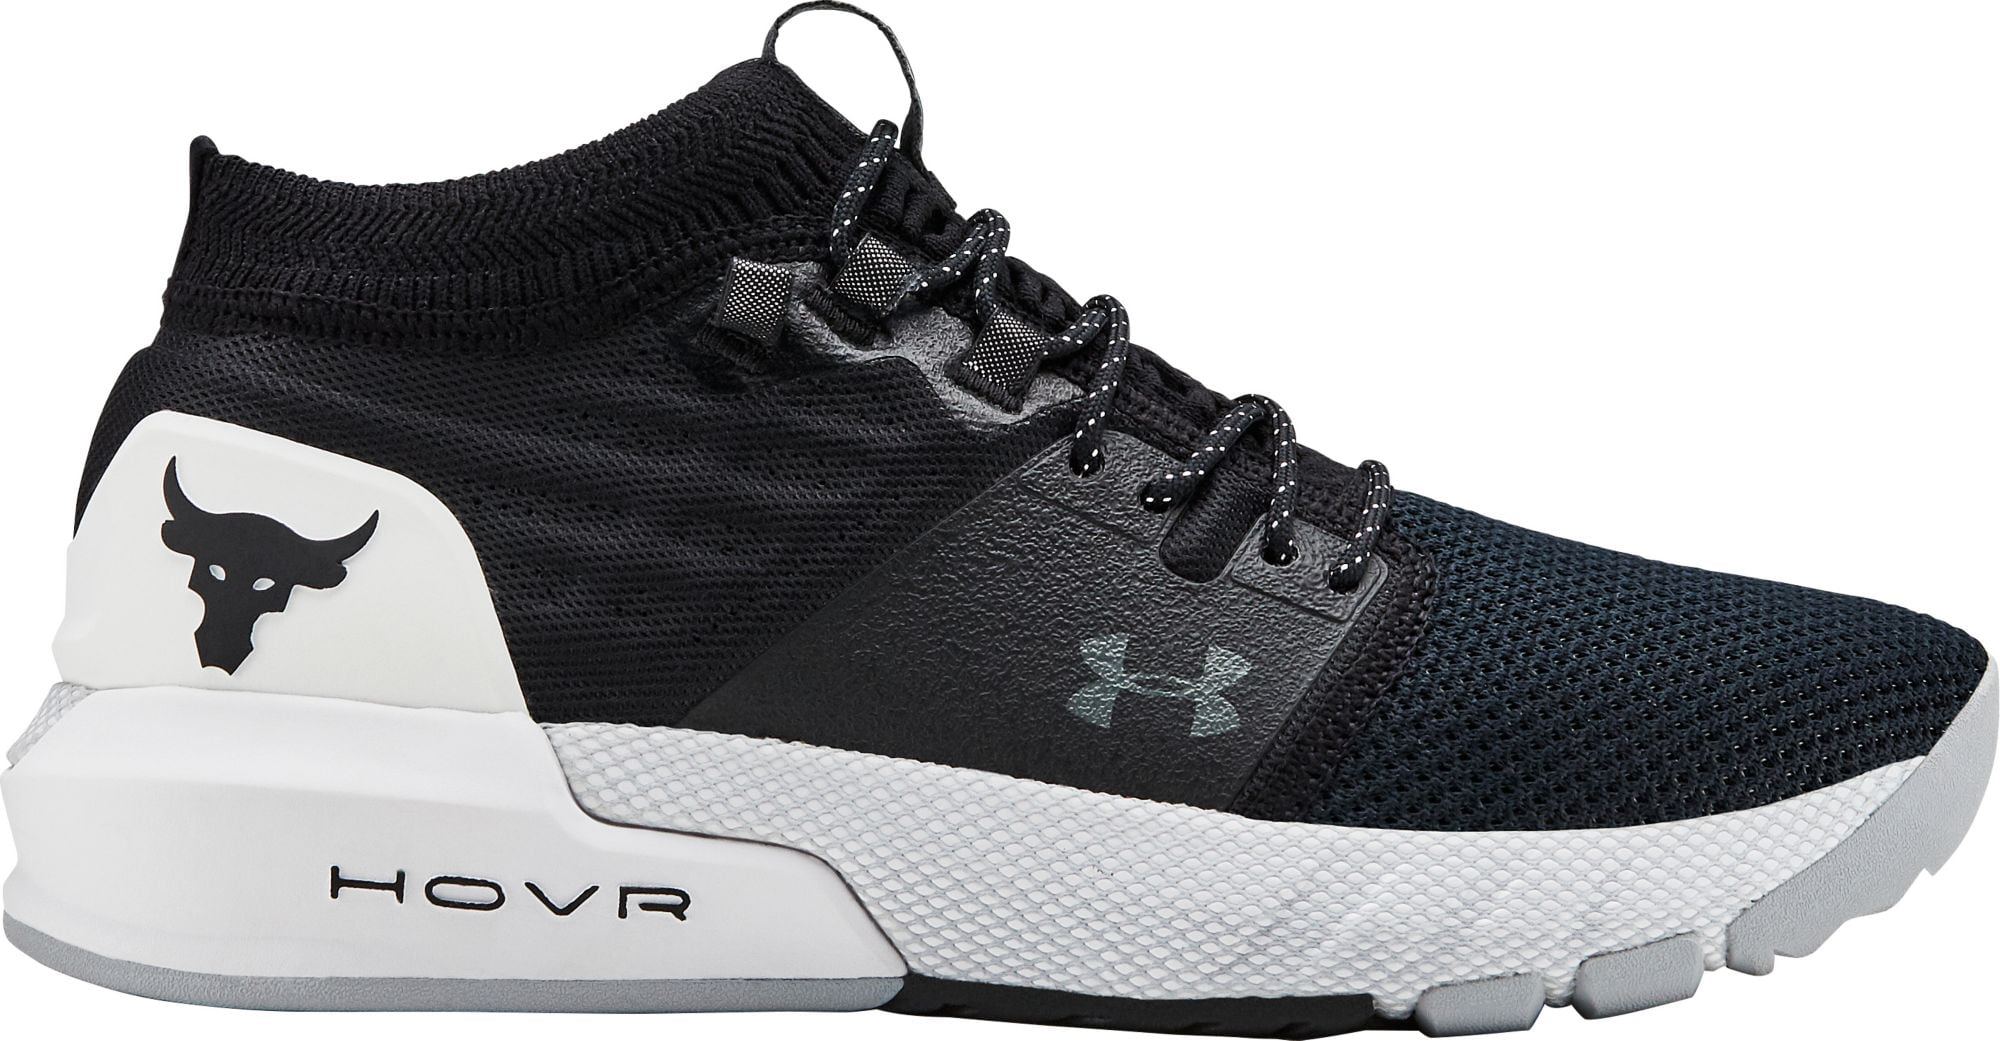 Under Armour - Under Armour Women's Project Rock 2 Training Shoes